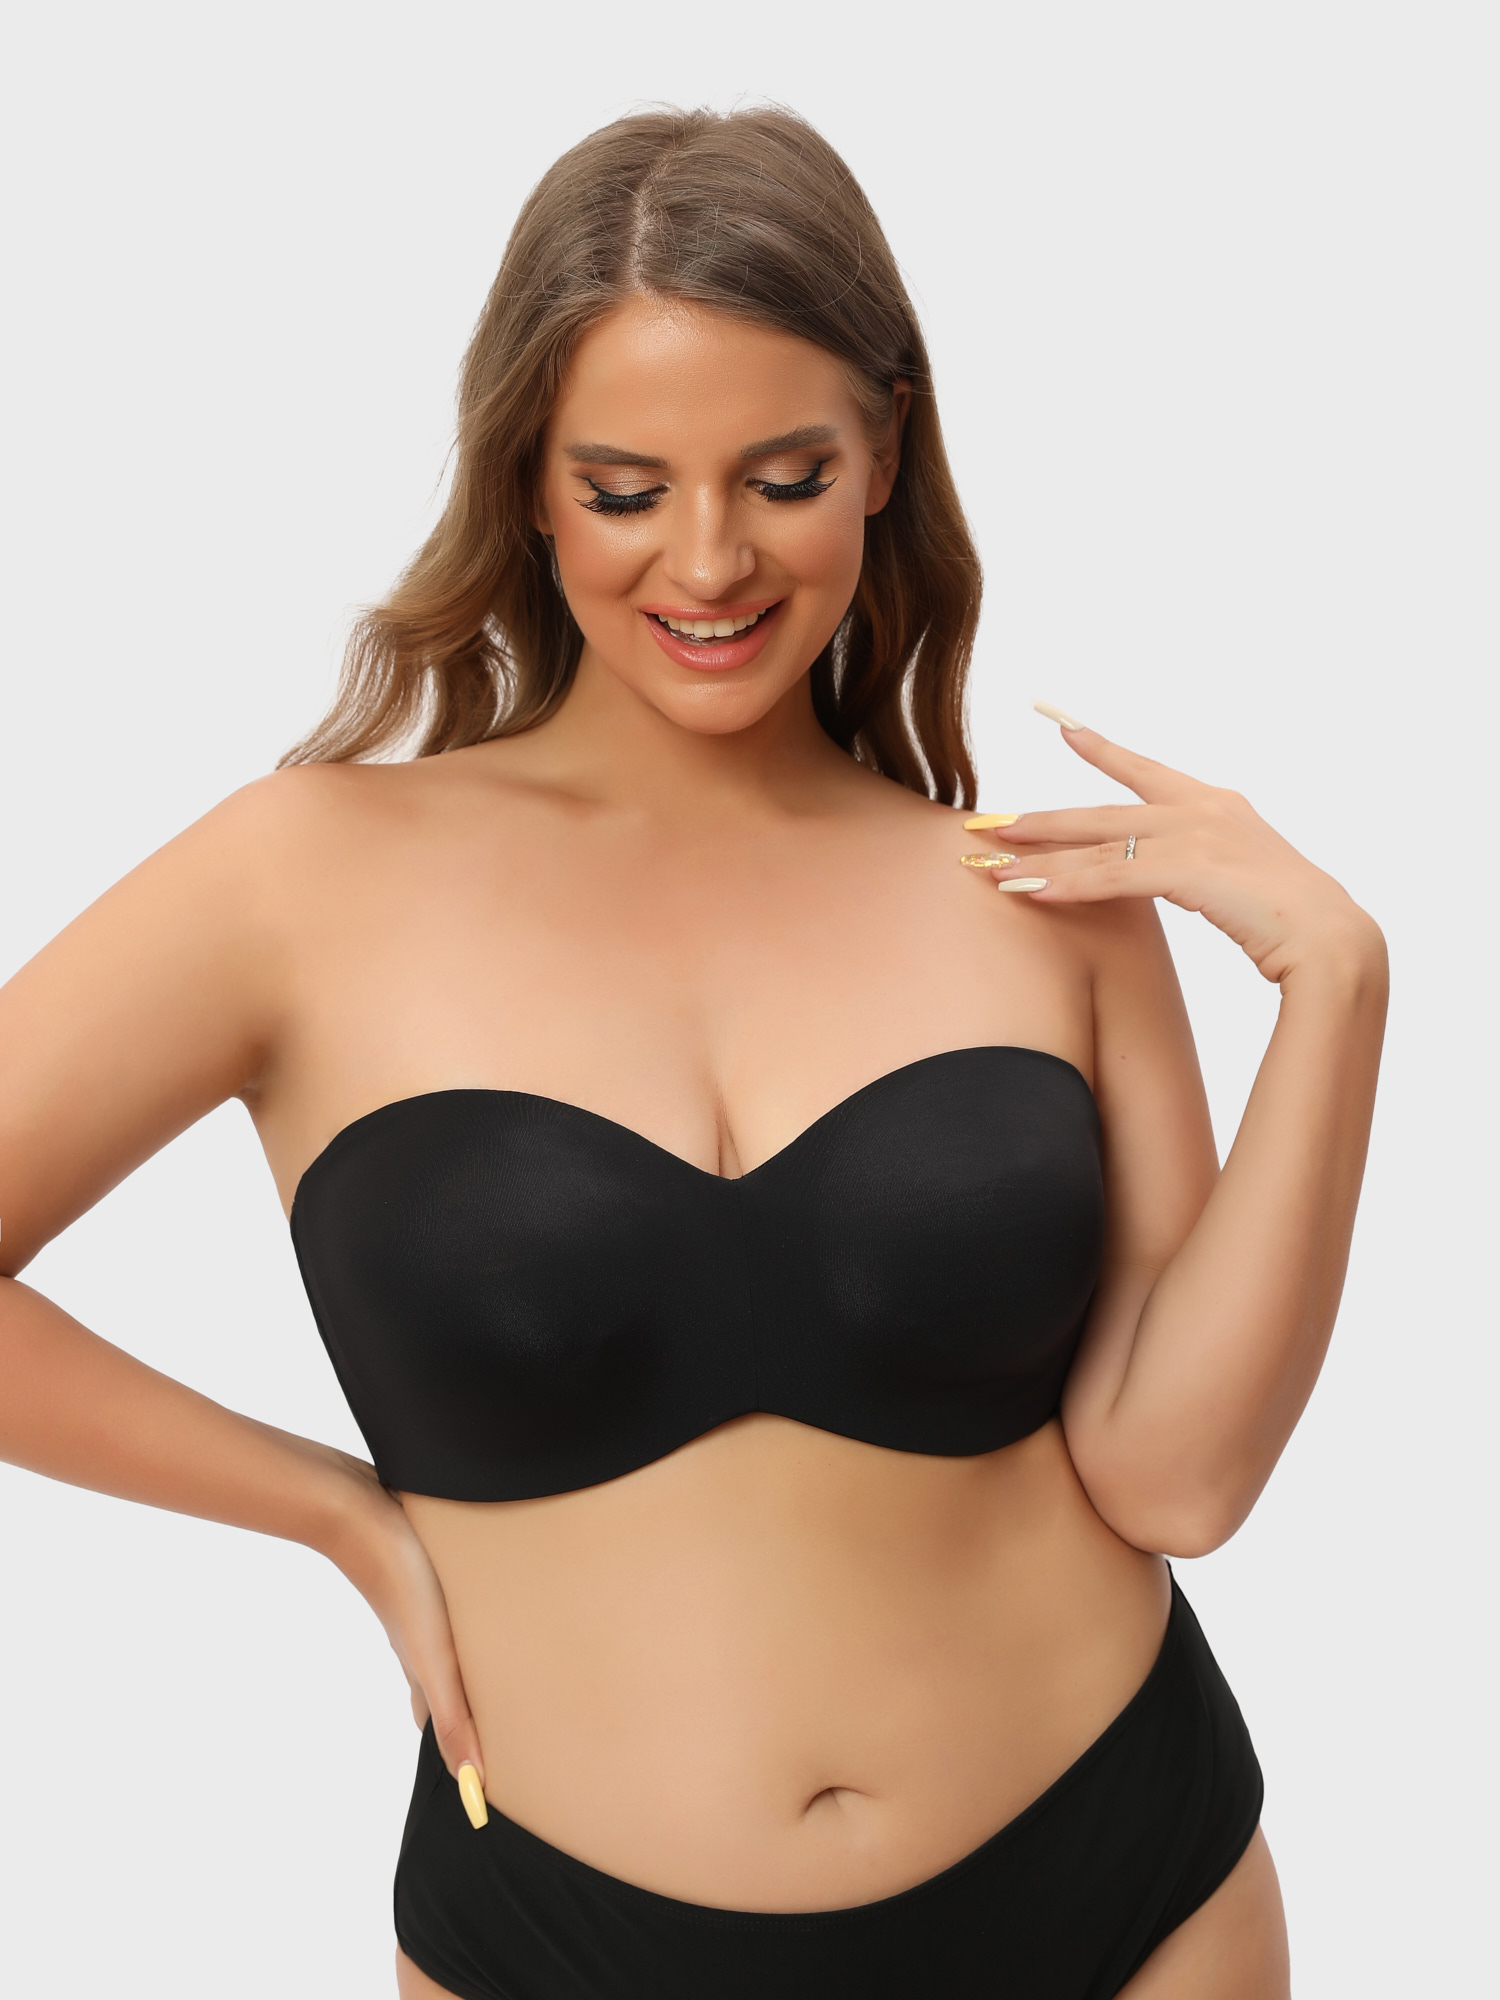 Bras Coluckor Front Closure Back Smoothing Bra Deep Cup Full